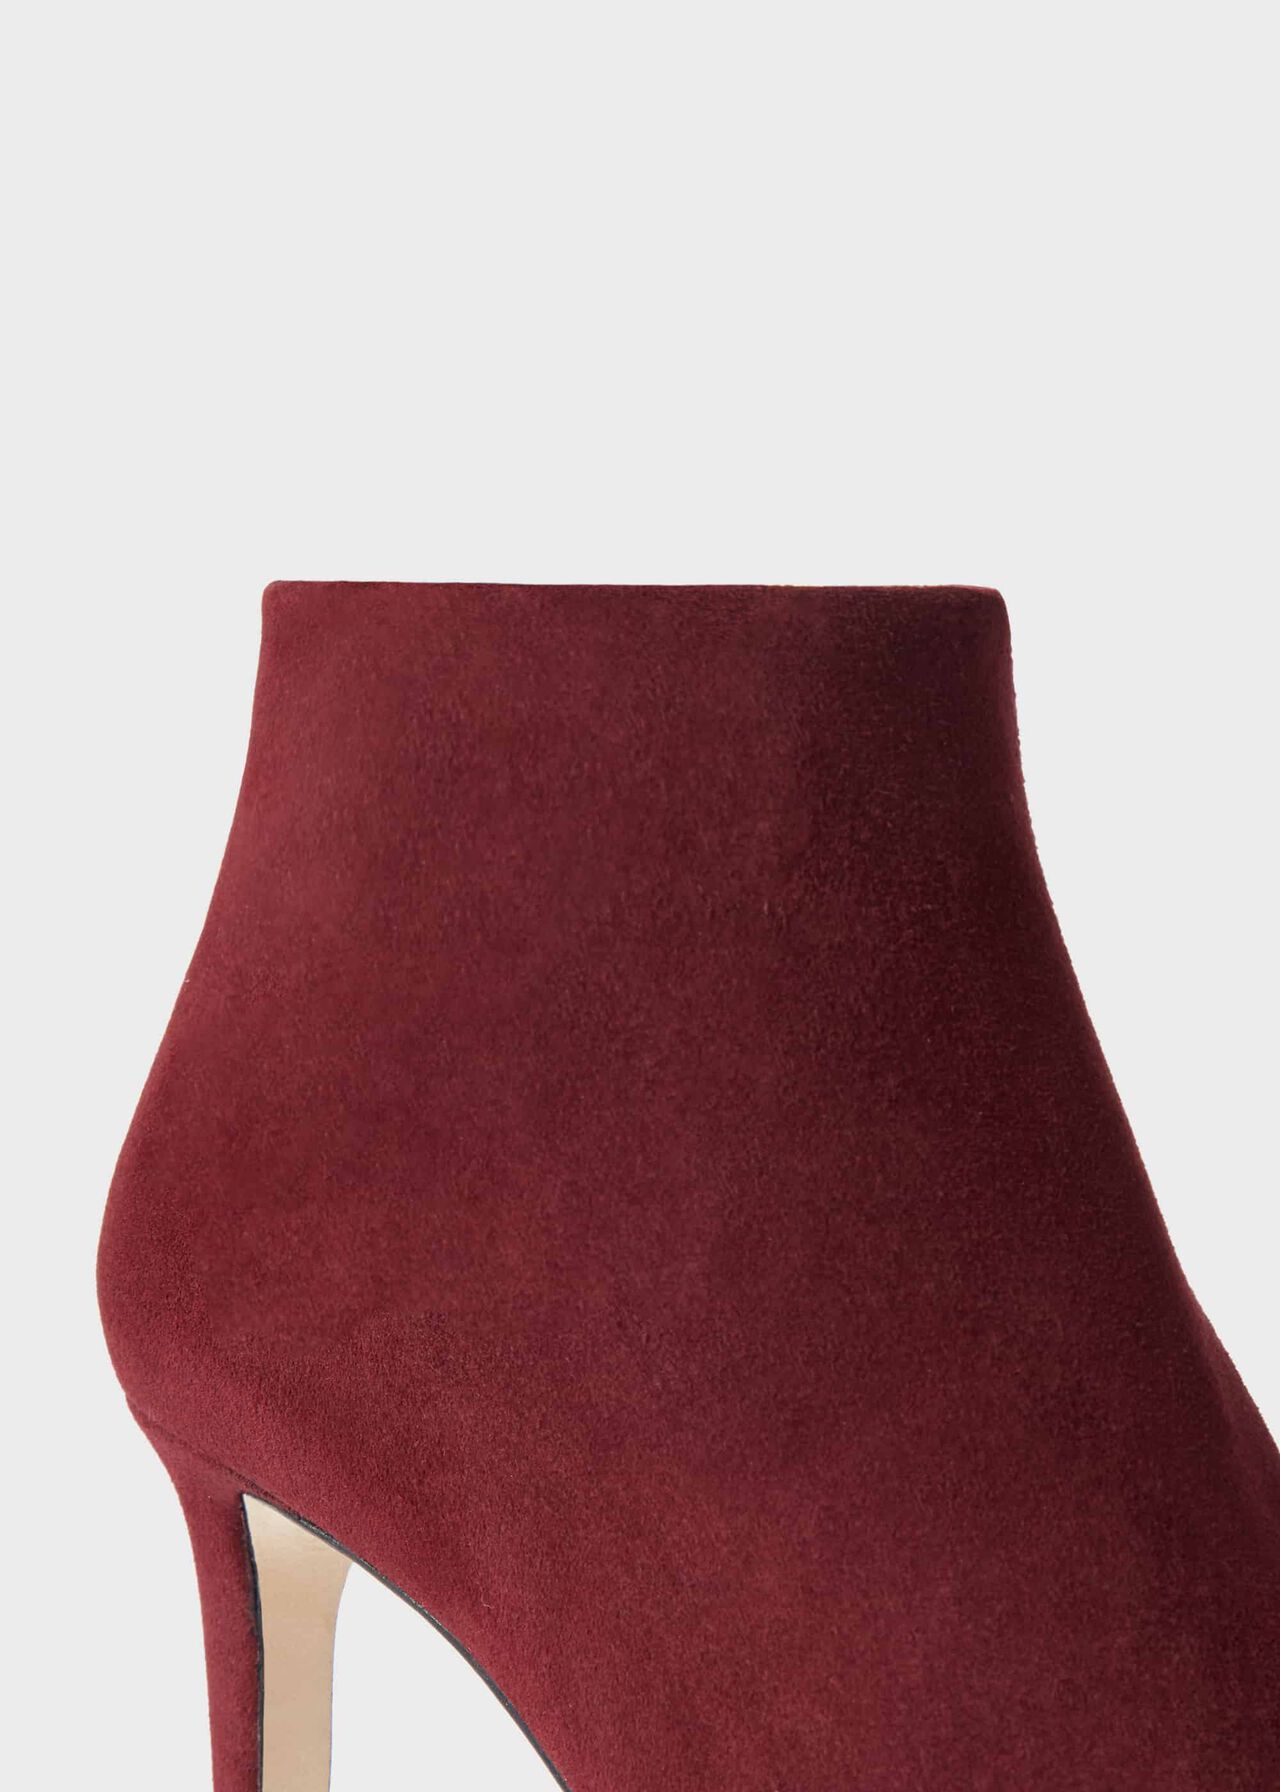 New Lizzie Ankle Boots, Wine, hi-res